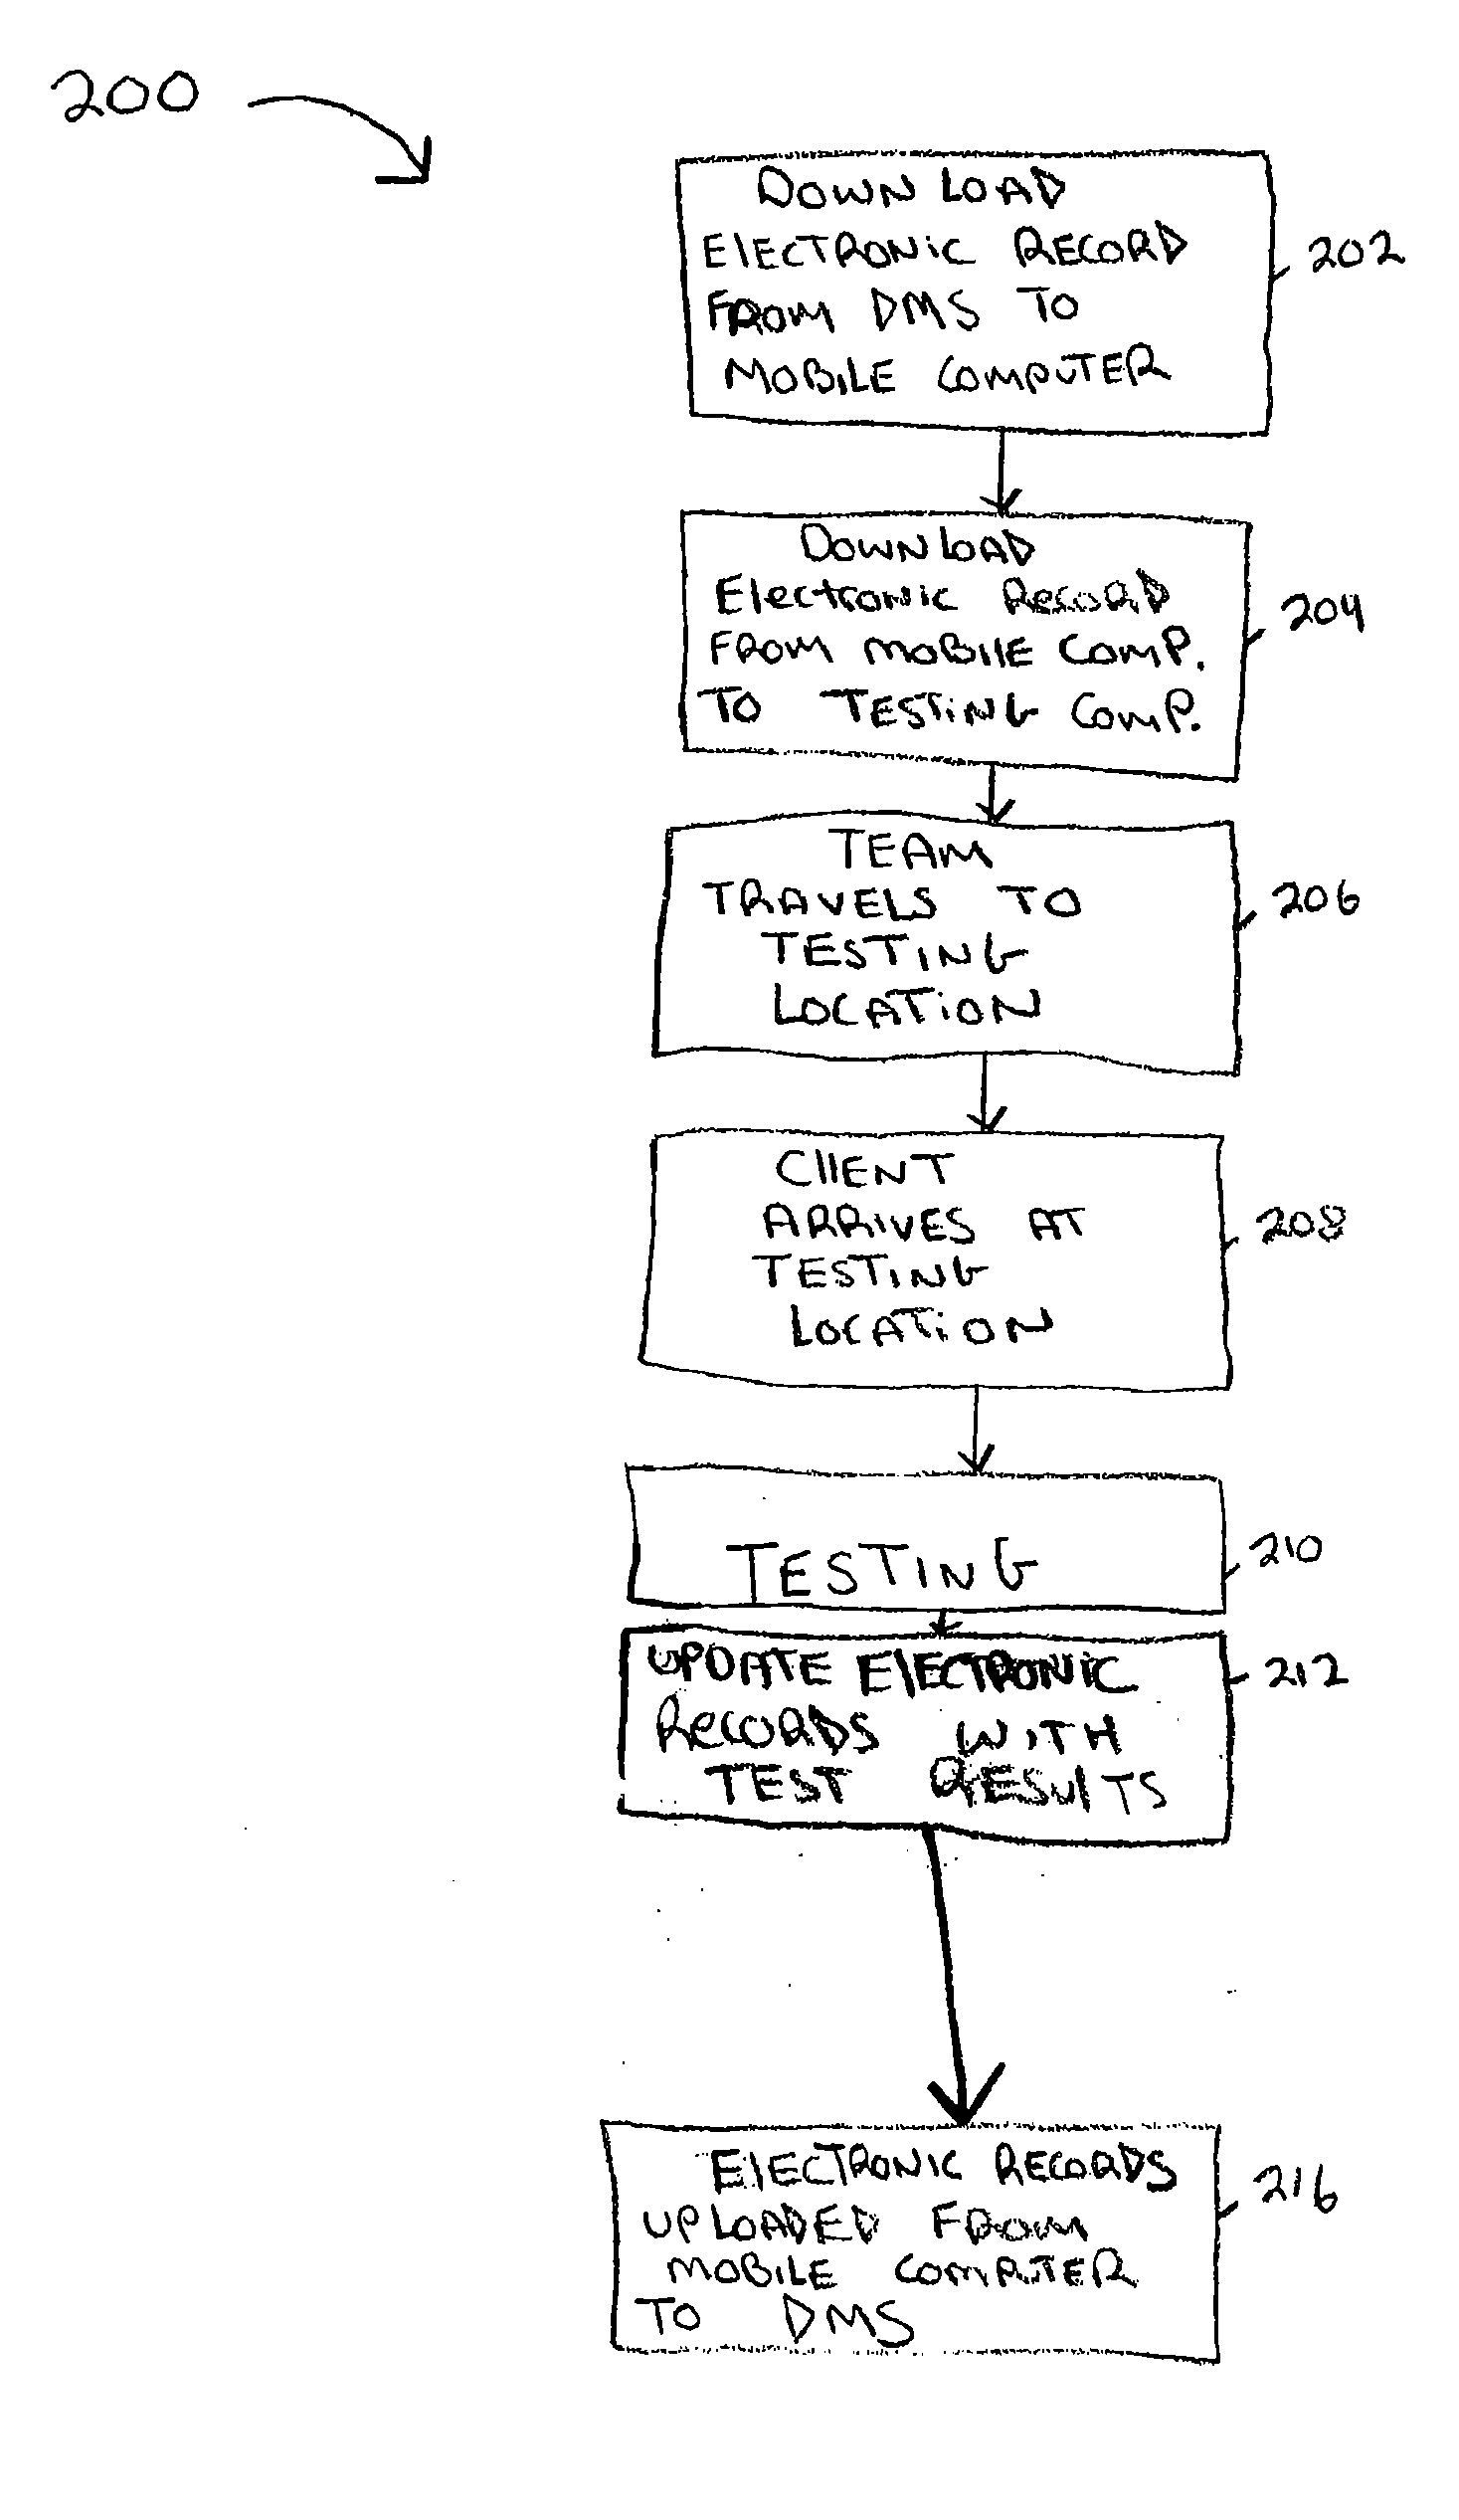 Medical screening system and method